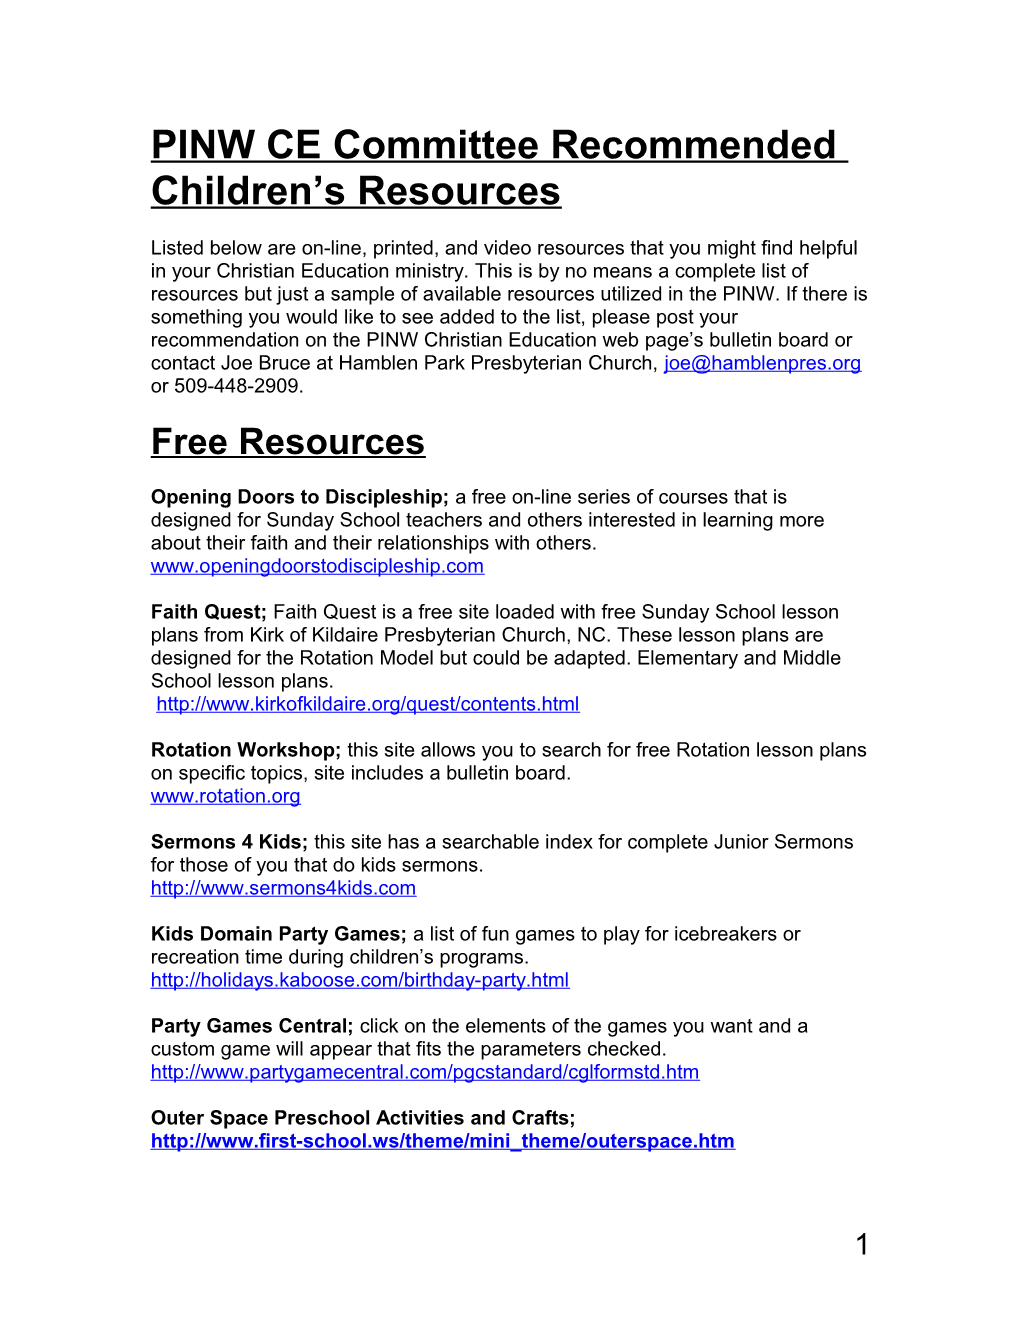 PINW CE Committee Recommended Children S Resources